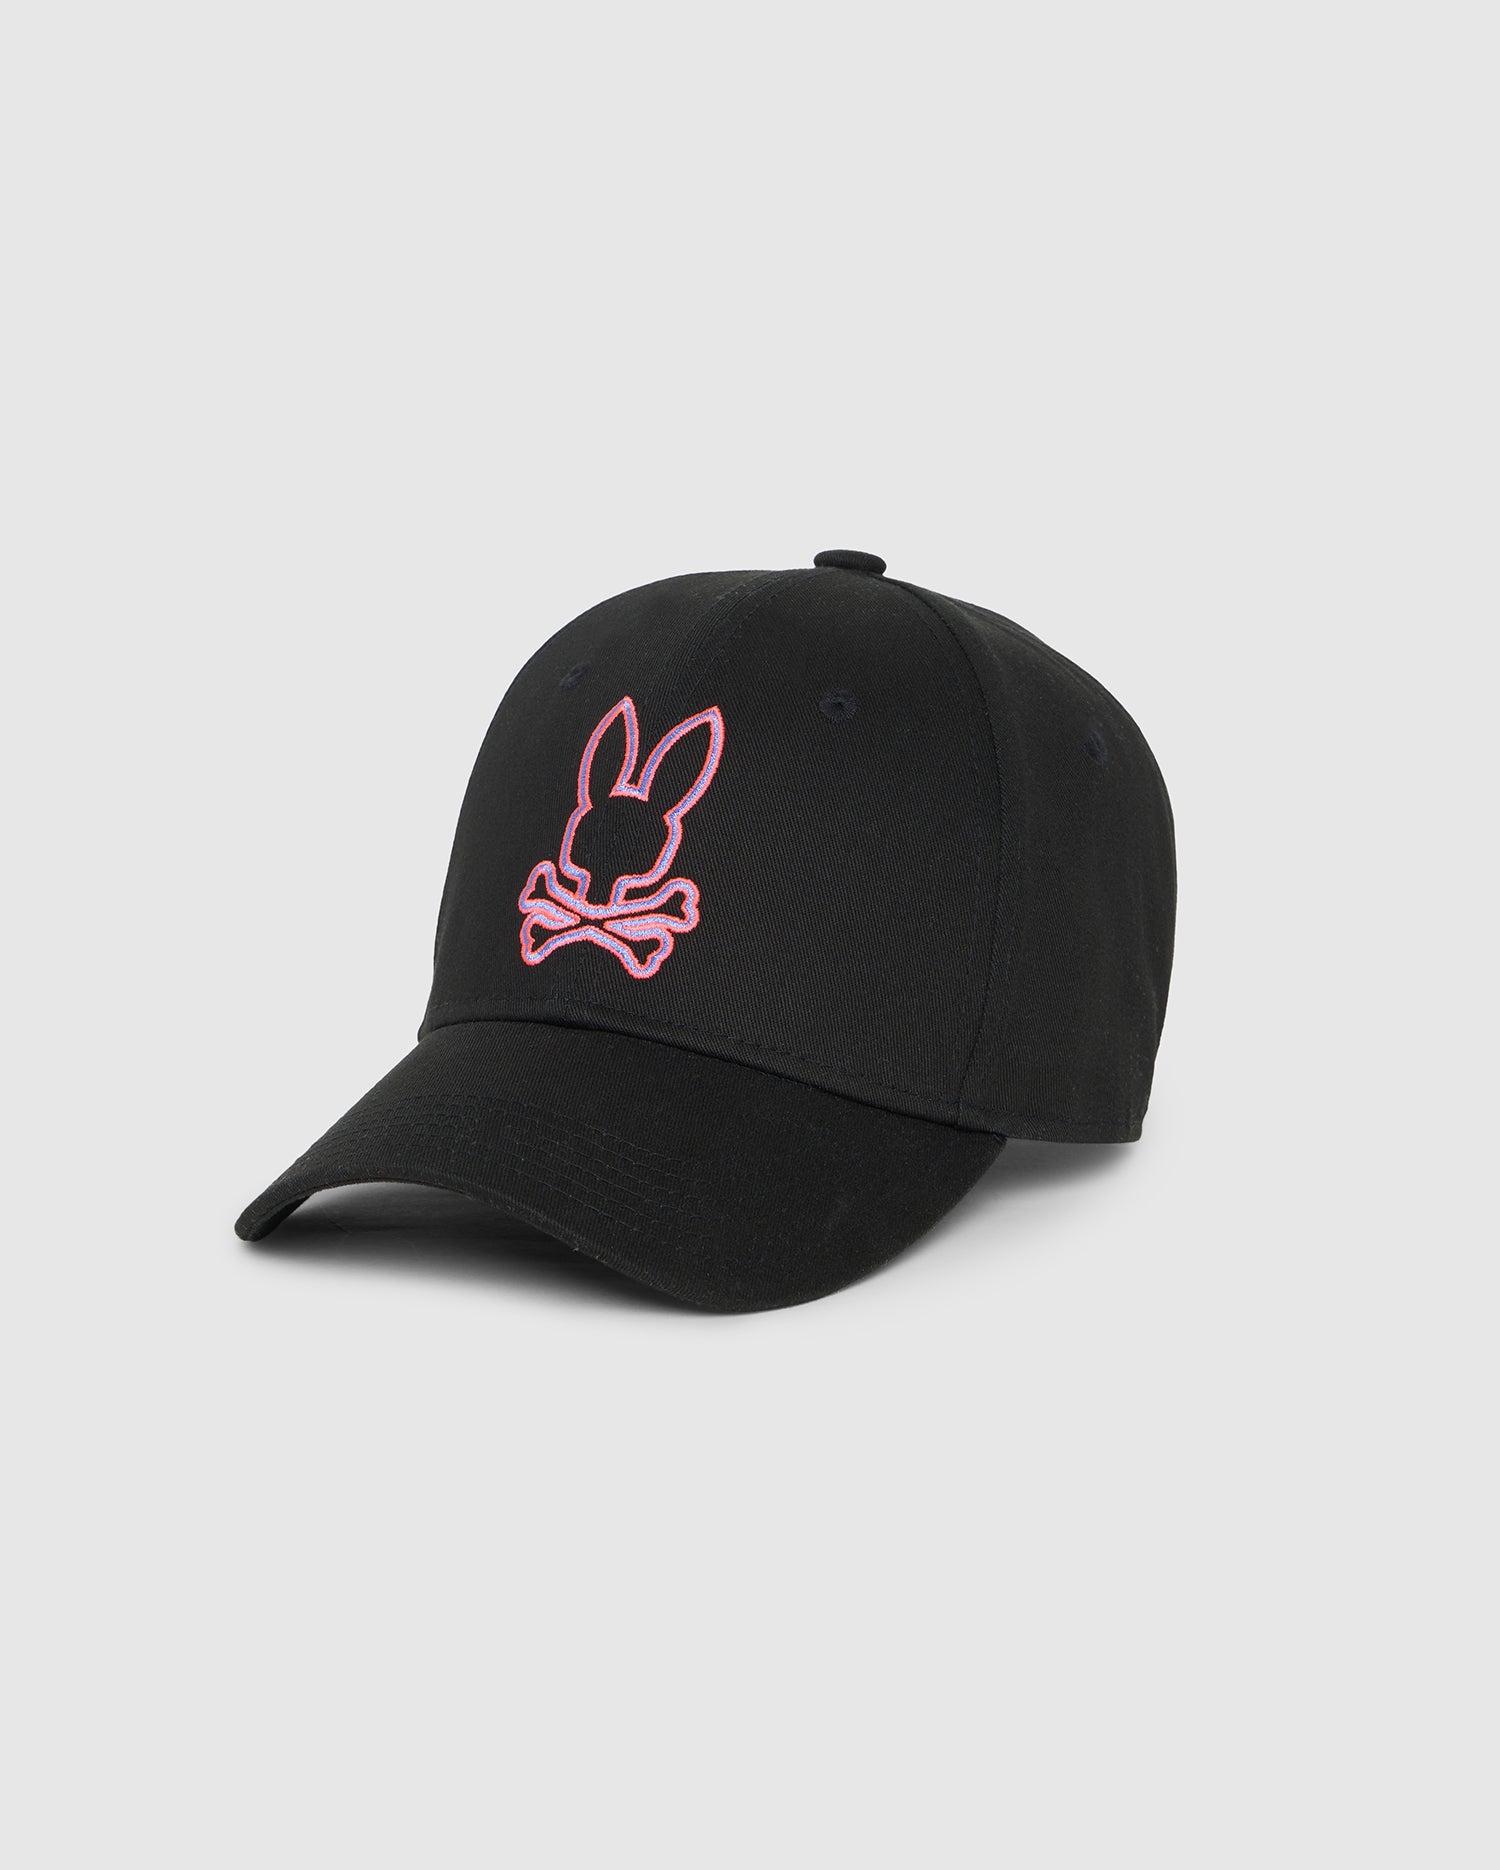 A Psycho Bunny MENS FLOYD BASEBALL CAP - B6A326B2HT made from durable cotton twill features a black design with a pink embroidered bunny head and crossed bones on the front. The cap, with its curved brim, stands out strikingly on a plain white background.